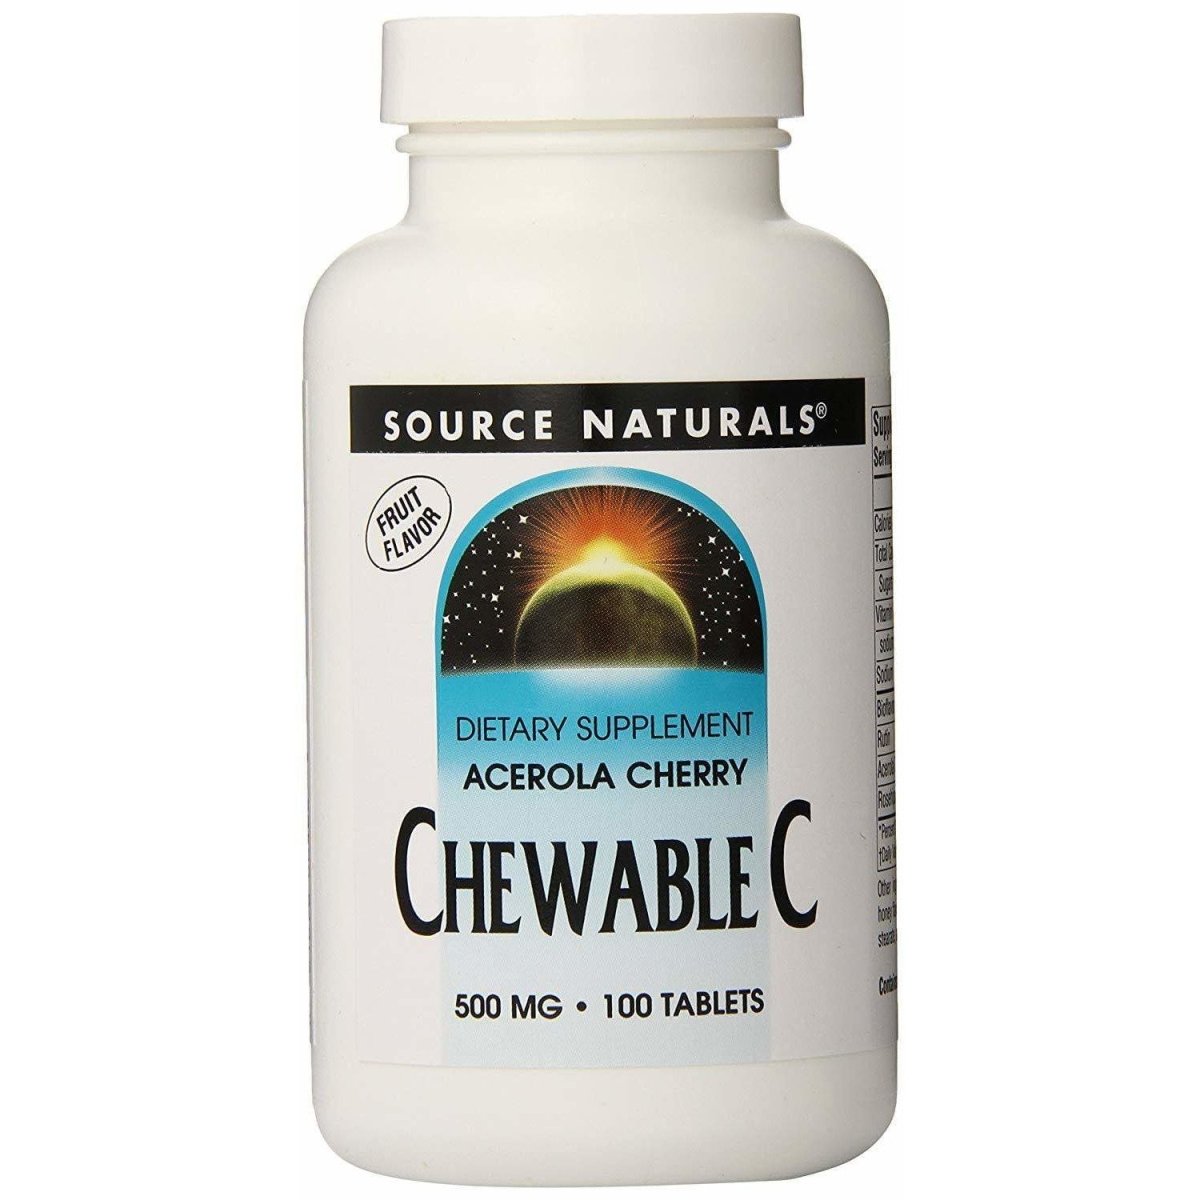 Acerola Cherry Chewable C - 500 Mg - 100 Tablets